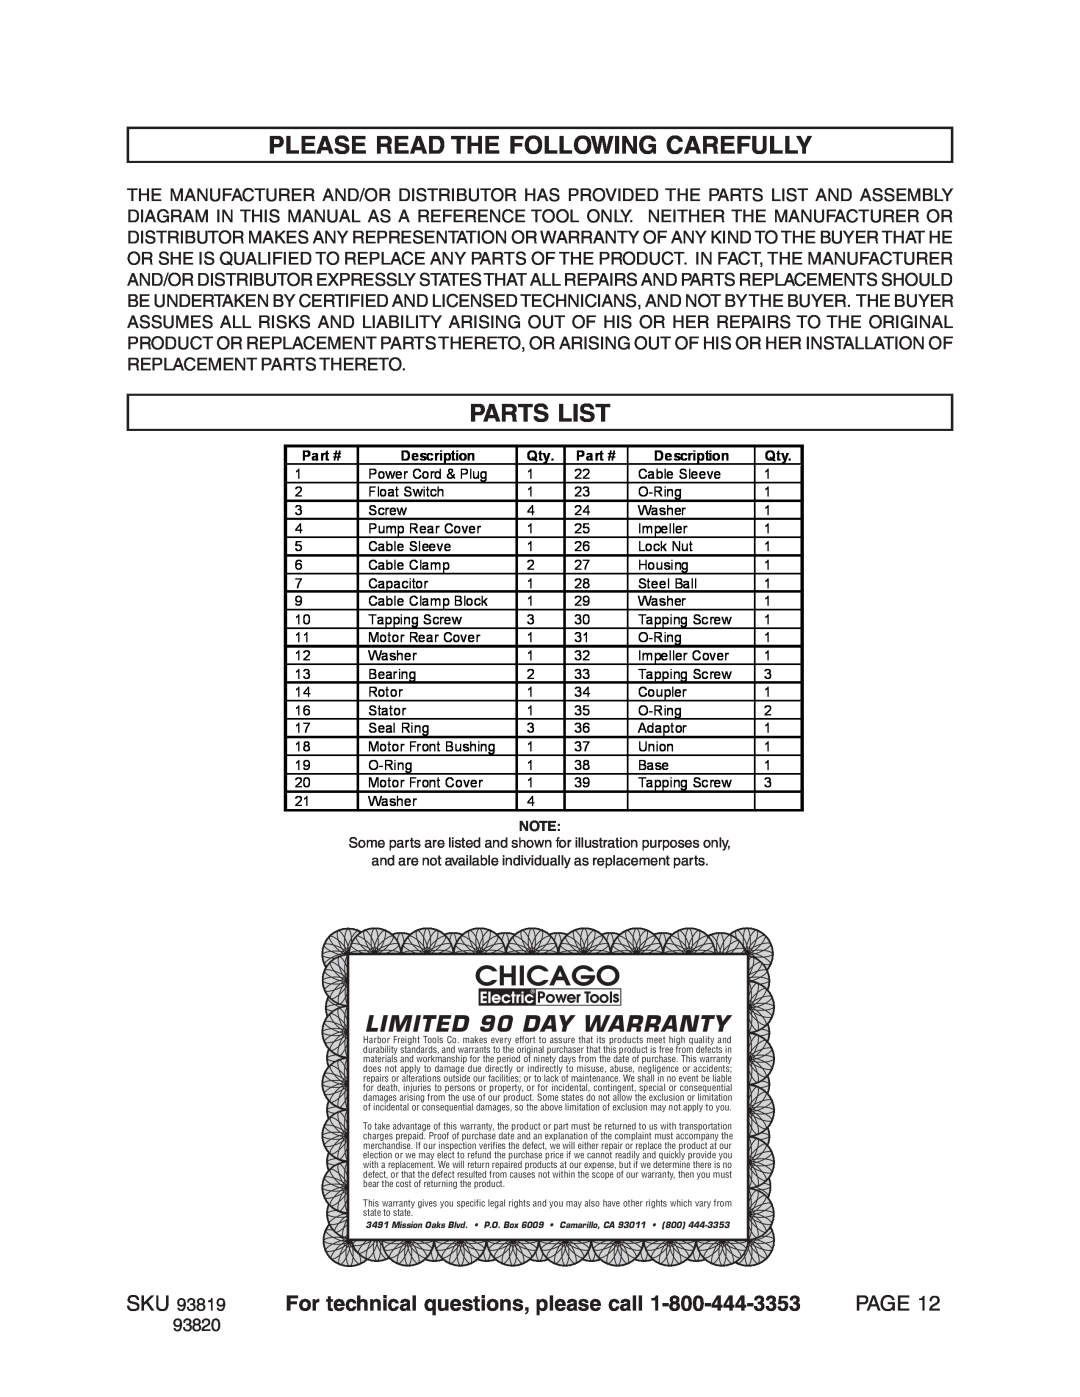 Harbor Freight Tools Model 93819 Please Read The Following Carefully, Parts List, LIMITED 90 DAY WARRANTY, Page, 93820 